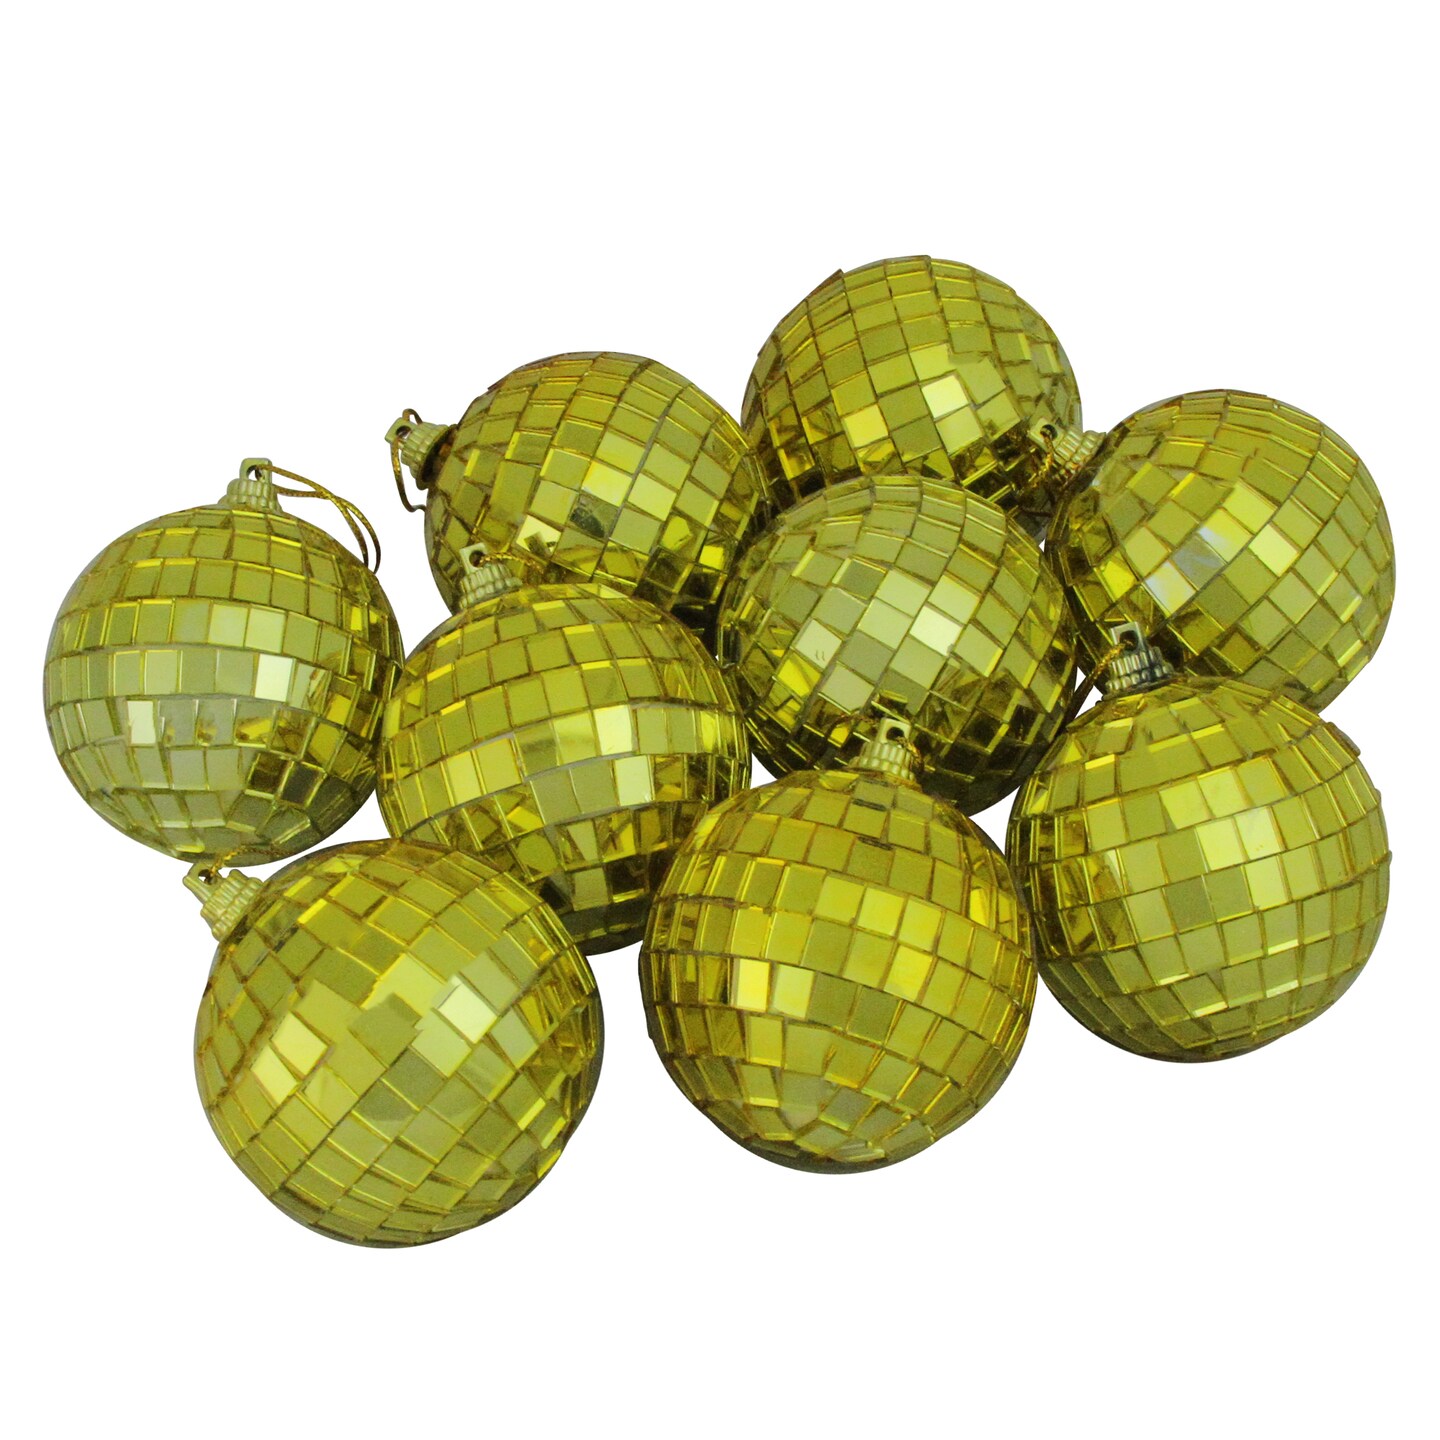 Northlight 9ct Gold Mirrored Glass Christmas Ball Ornaments 2.5